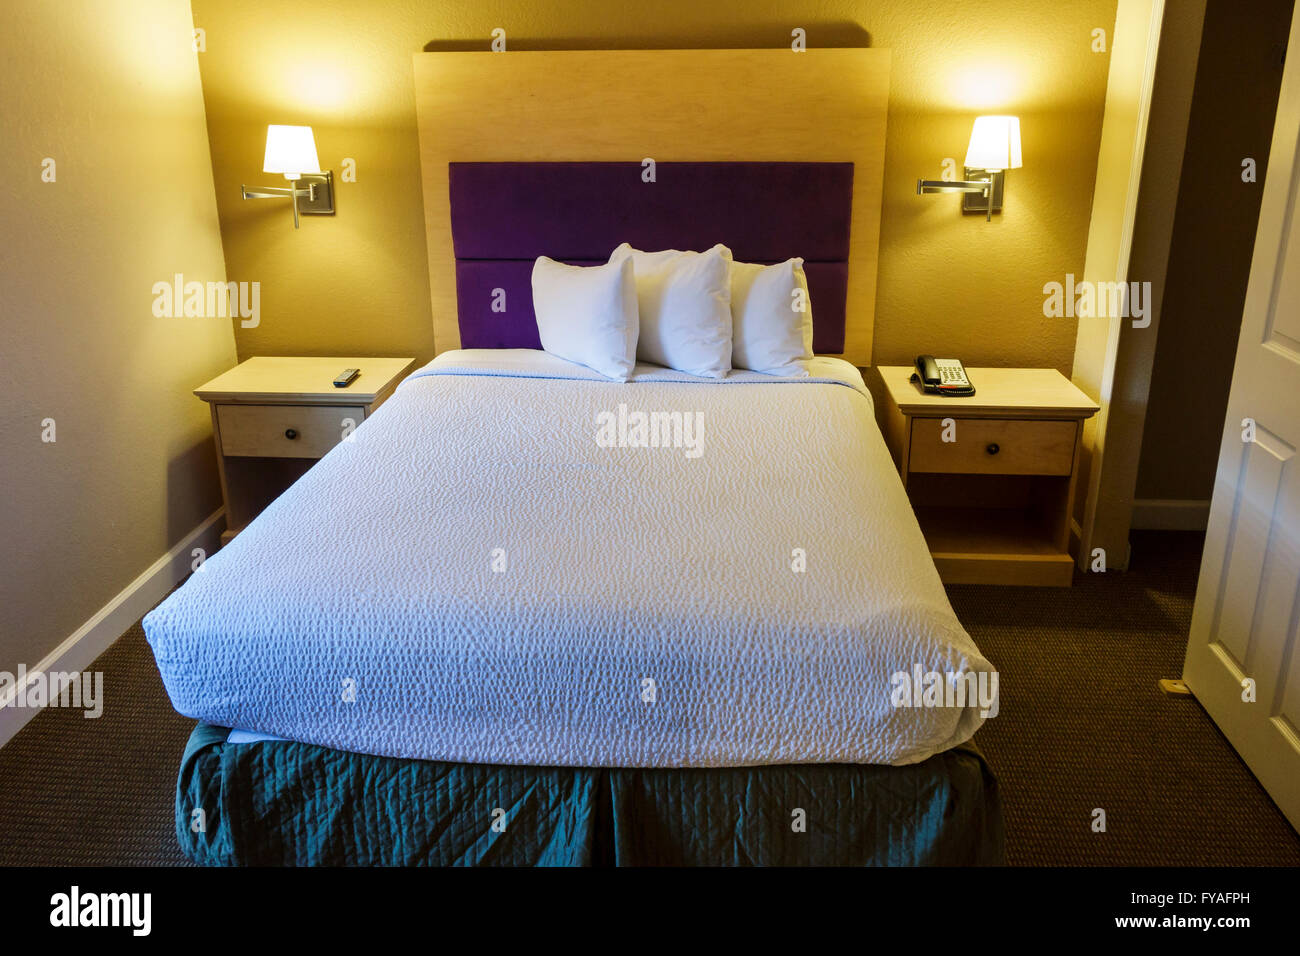 Florida Kissimmee,Orlando,Legacy Vacation Club,timeshare unit suite,resort,interior inside,bedroom,bed,made,pillows,FL160401032 Stock Photo